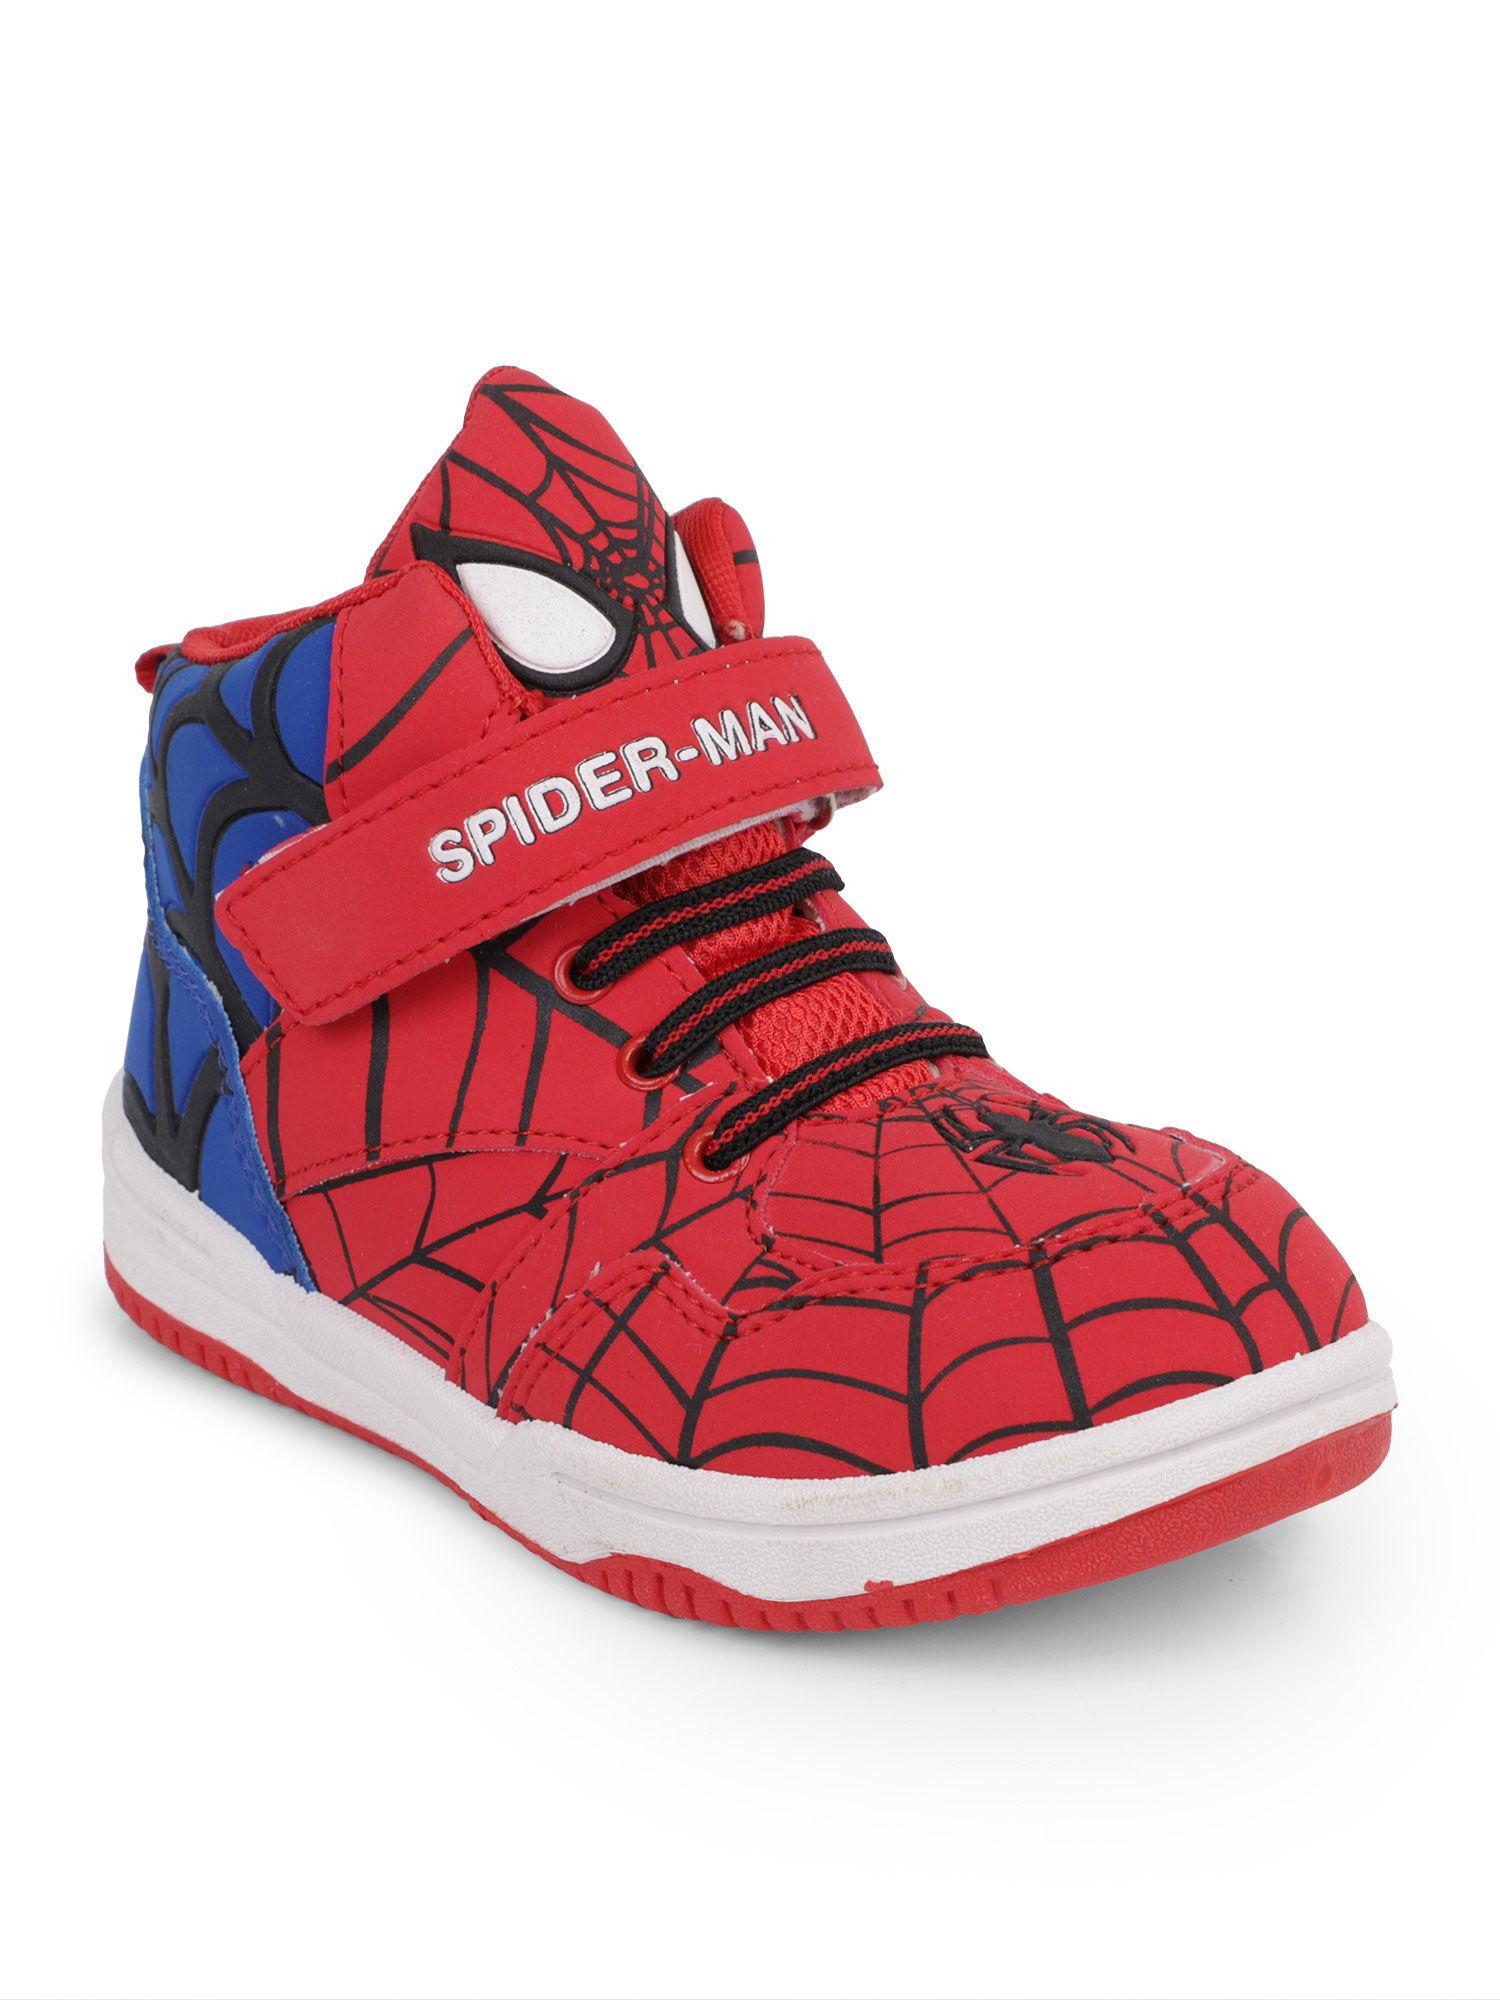 red color spiderman printed shoes for boys